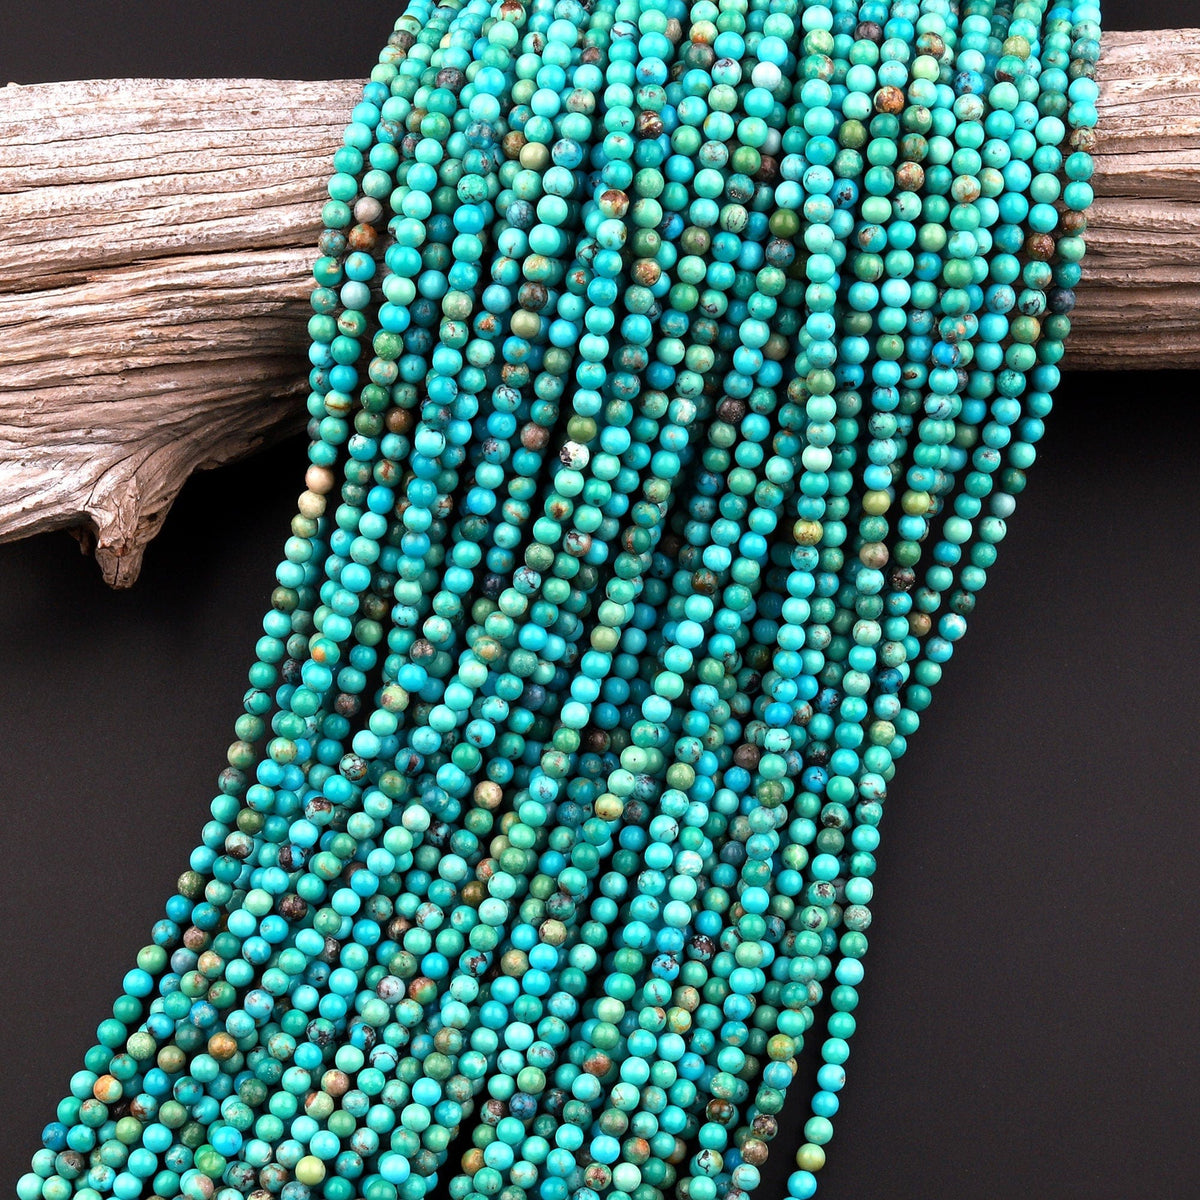 4mm Blue Turquoise Beads Round Gemstone Loose Beads for Jewelry Making  (90-95pcs/strand)